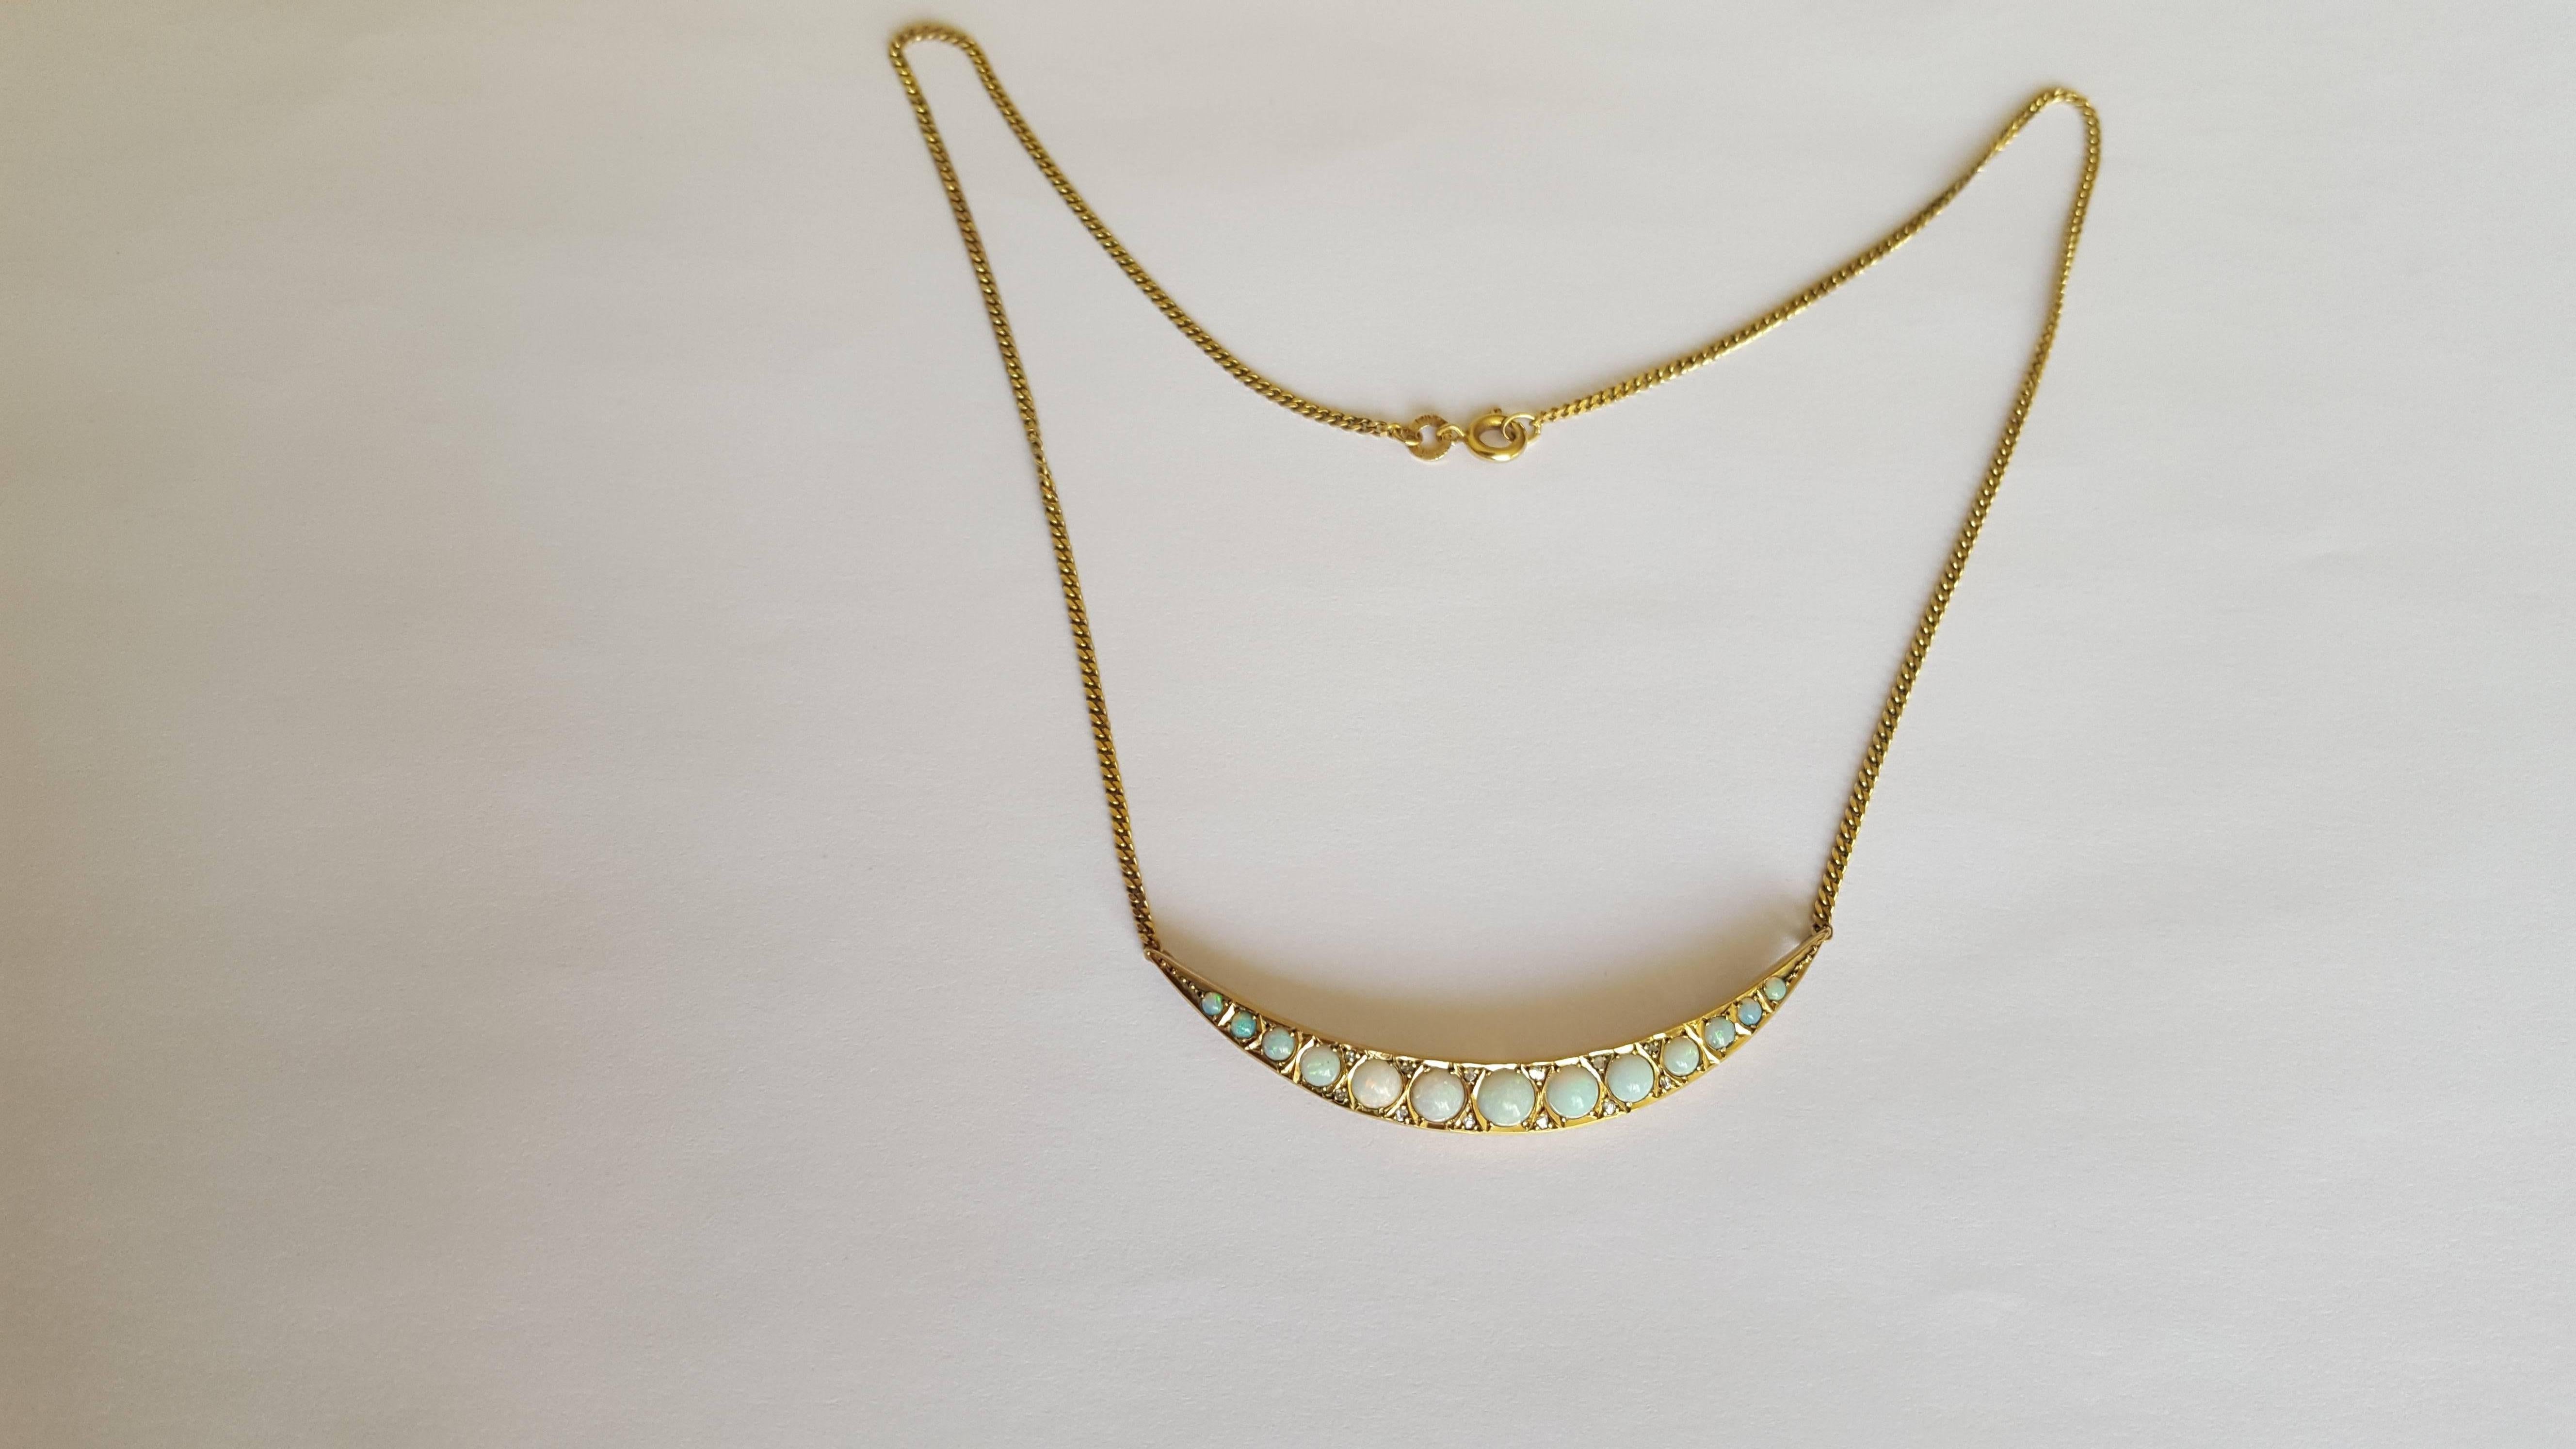 A Beautiful Antique Victorian 9 Carat Gold, Opal and Diamond crescent necklace brooch conversion on later 9 Carat Gold chain. 
Total length of the necklace 15 3/4"
Crescent 2".
Crescent and chain hallmarked for 9 Carat Gold. 